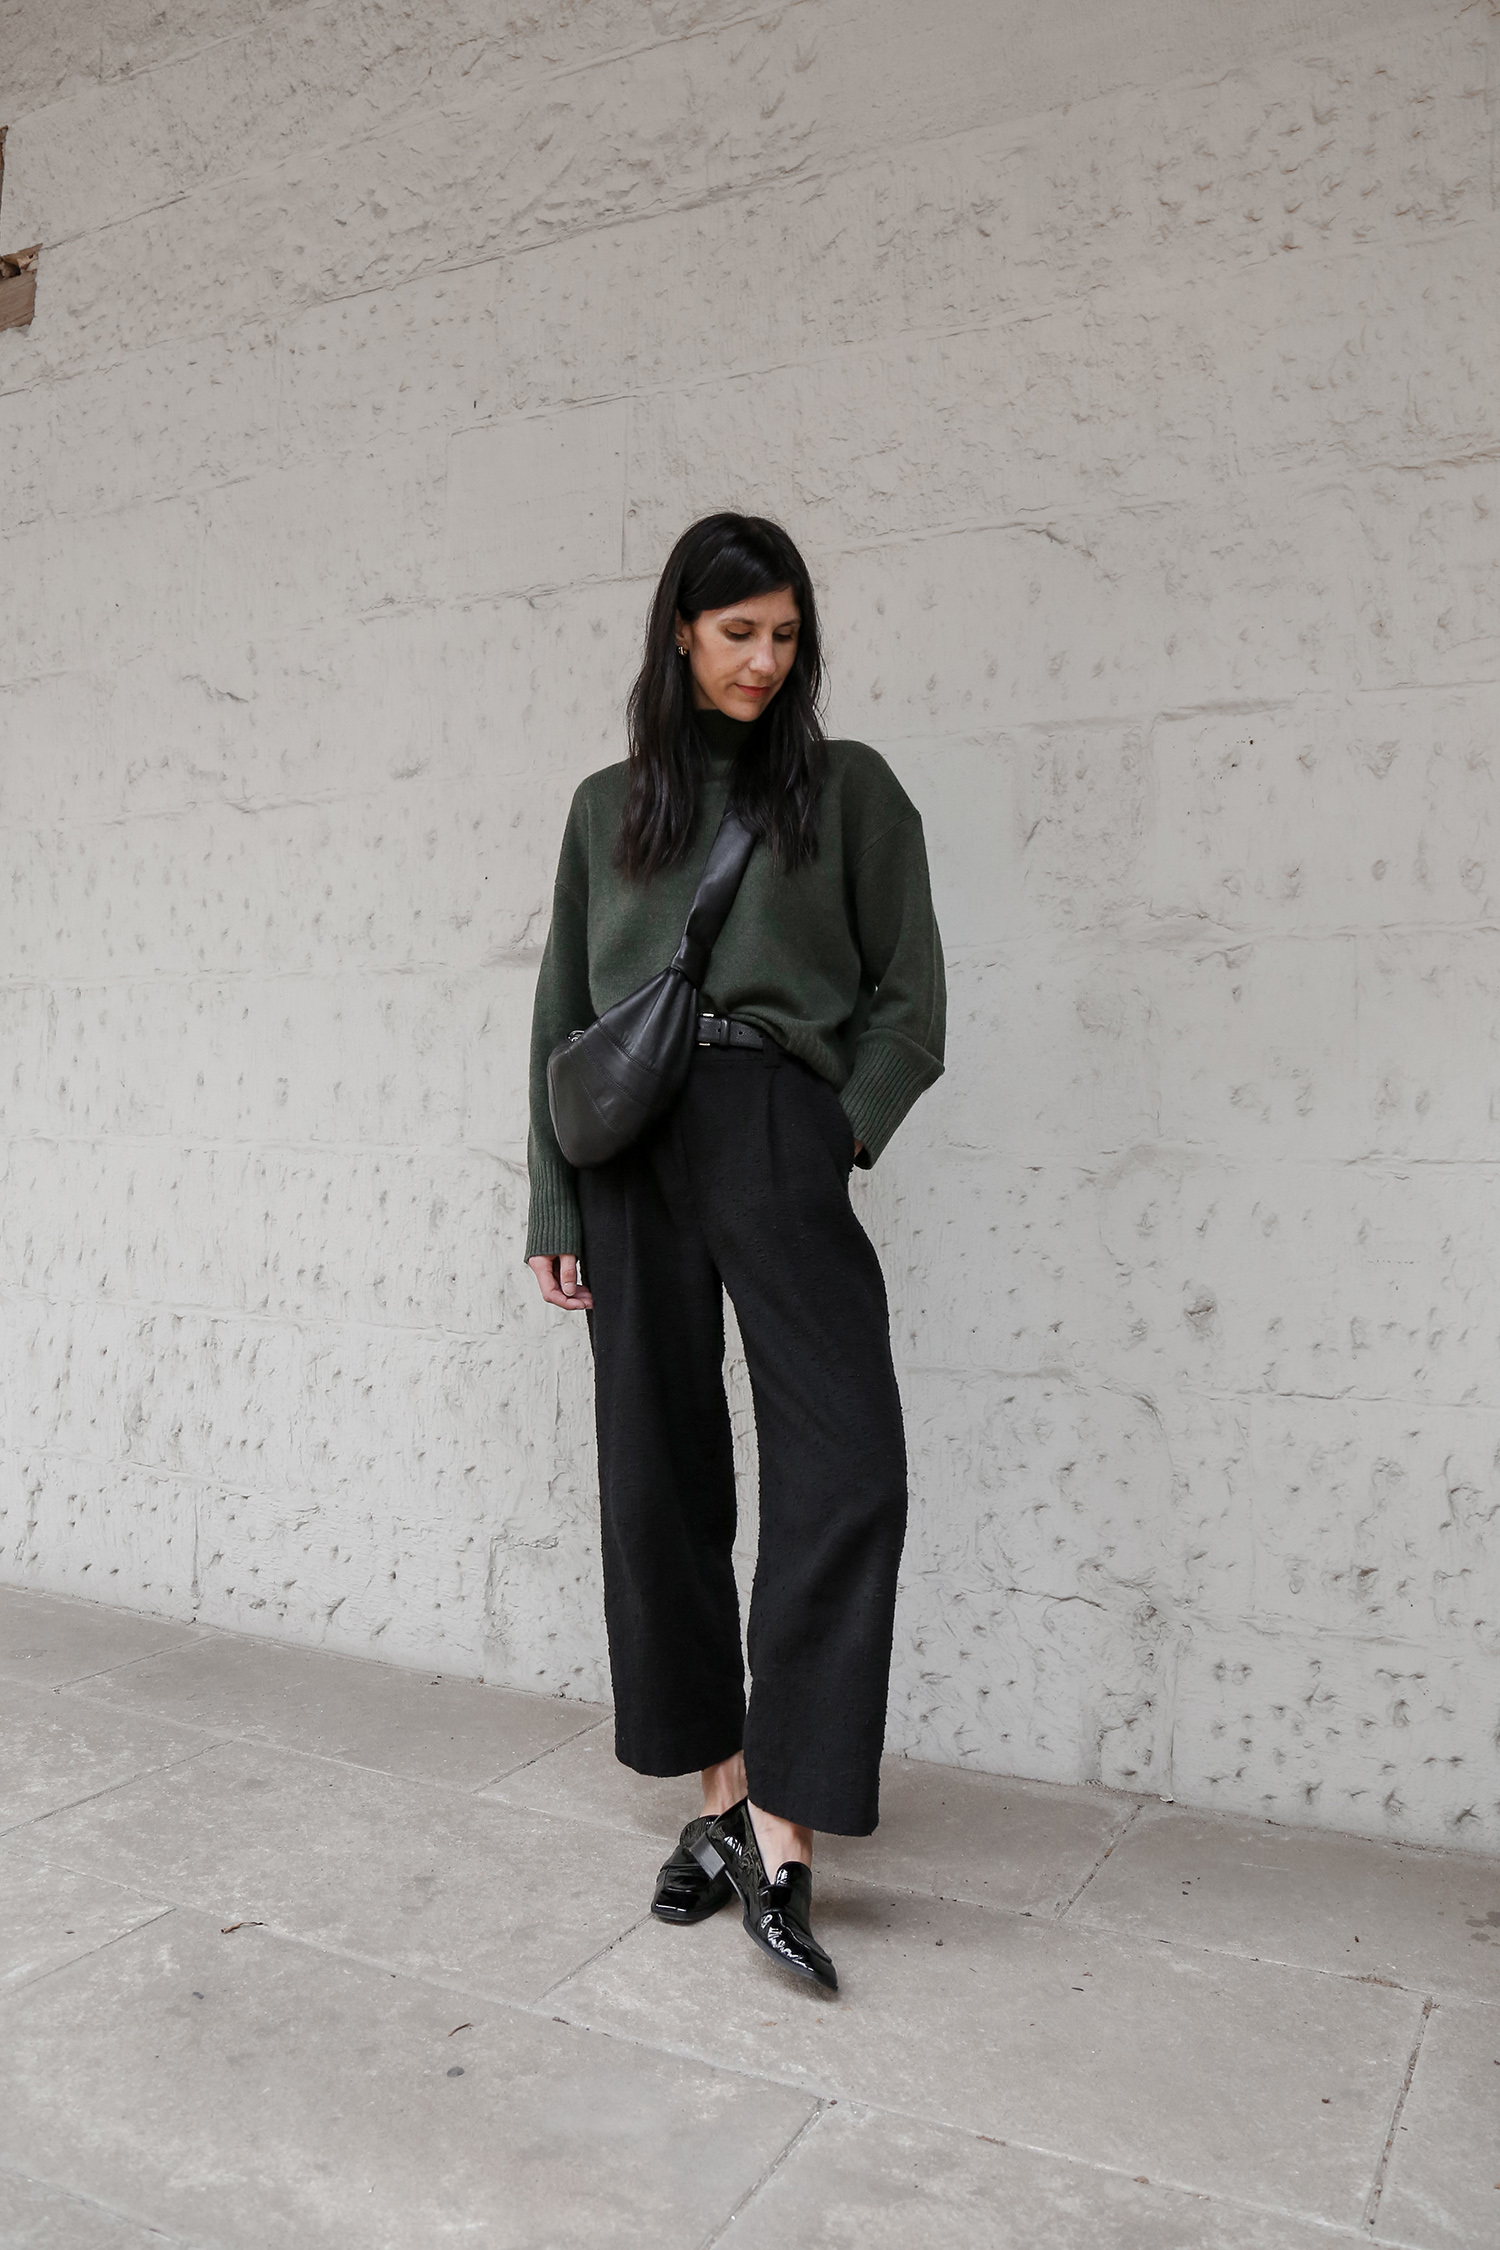 Everlane recashmere sweater with House of Dagmar Valentina trousers